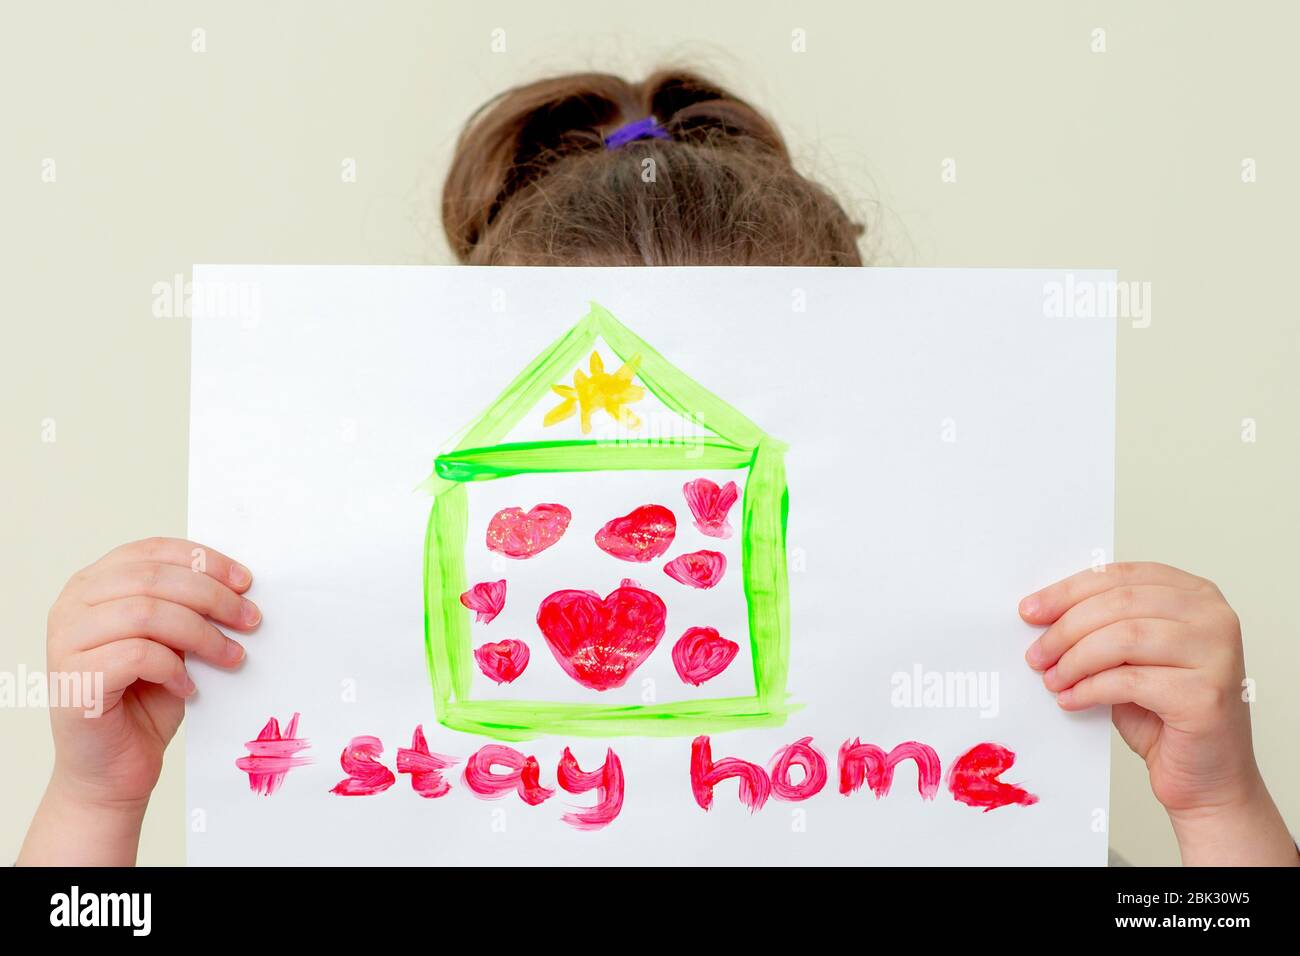 Little girl covers his face a picture of a house with hearts and words Stay Home on sheet of paper, close-up. Stay home concept. Stock Photo